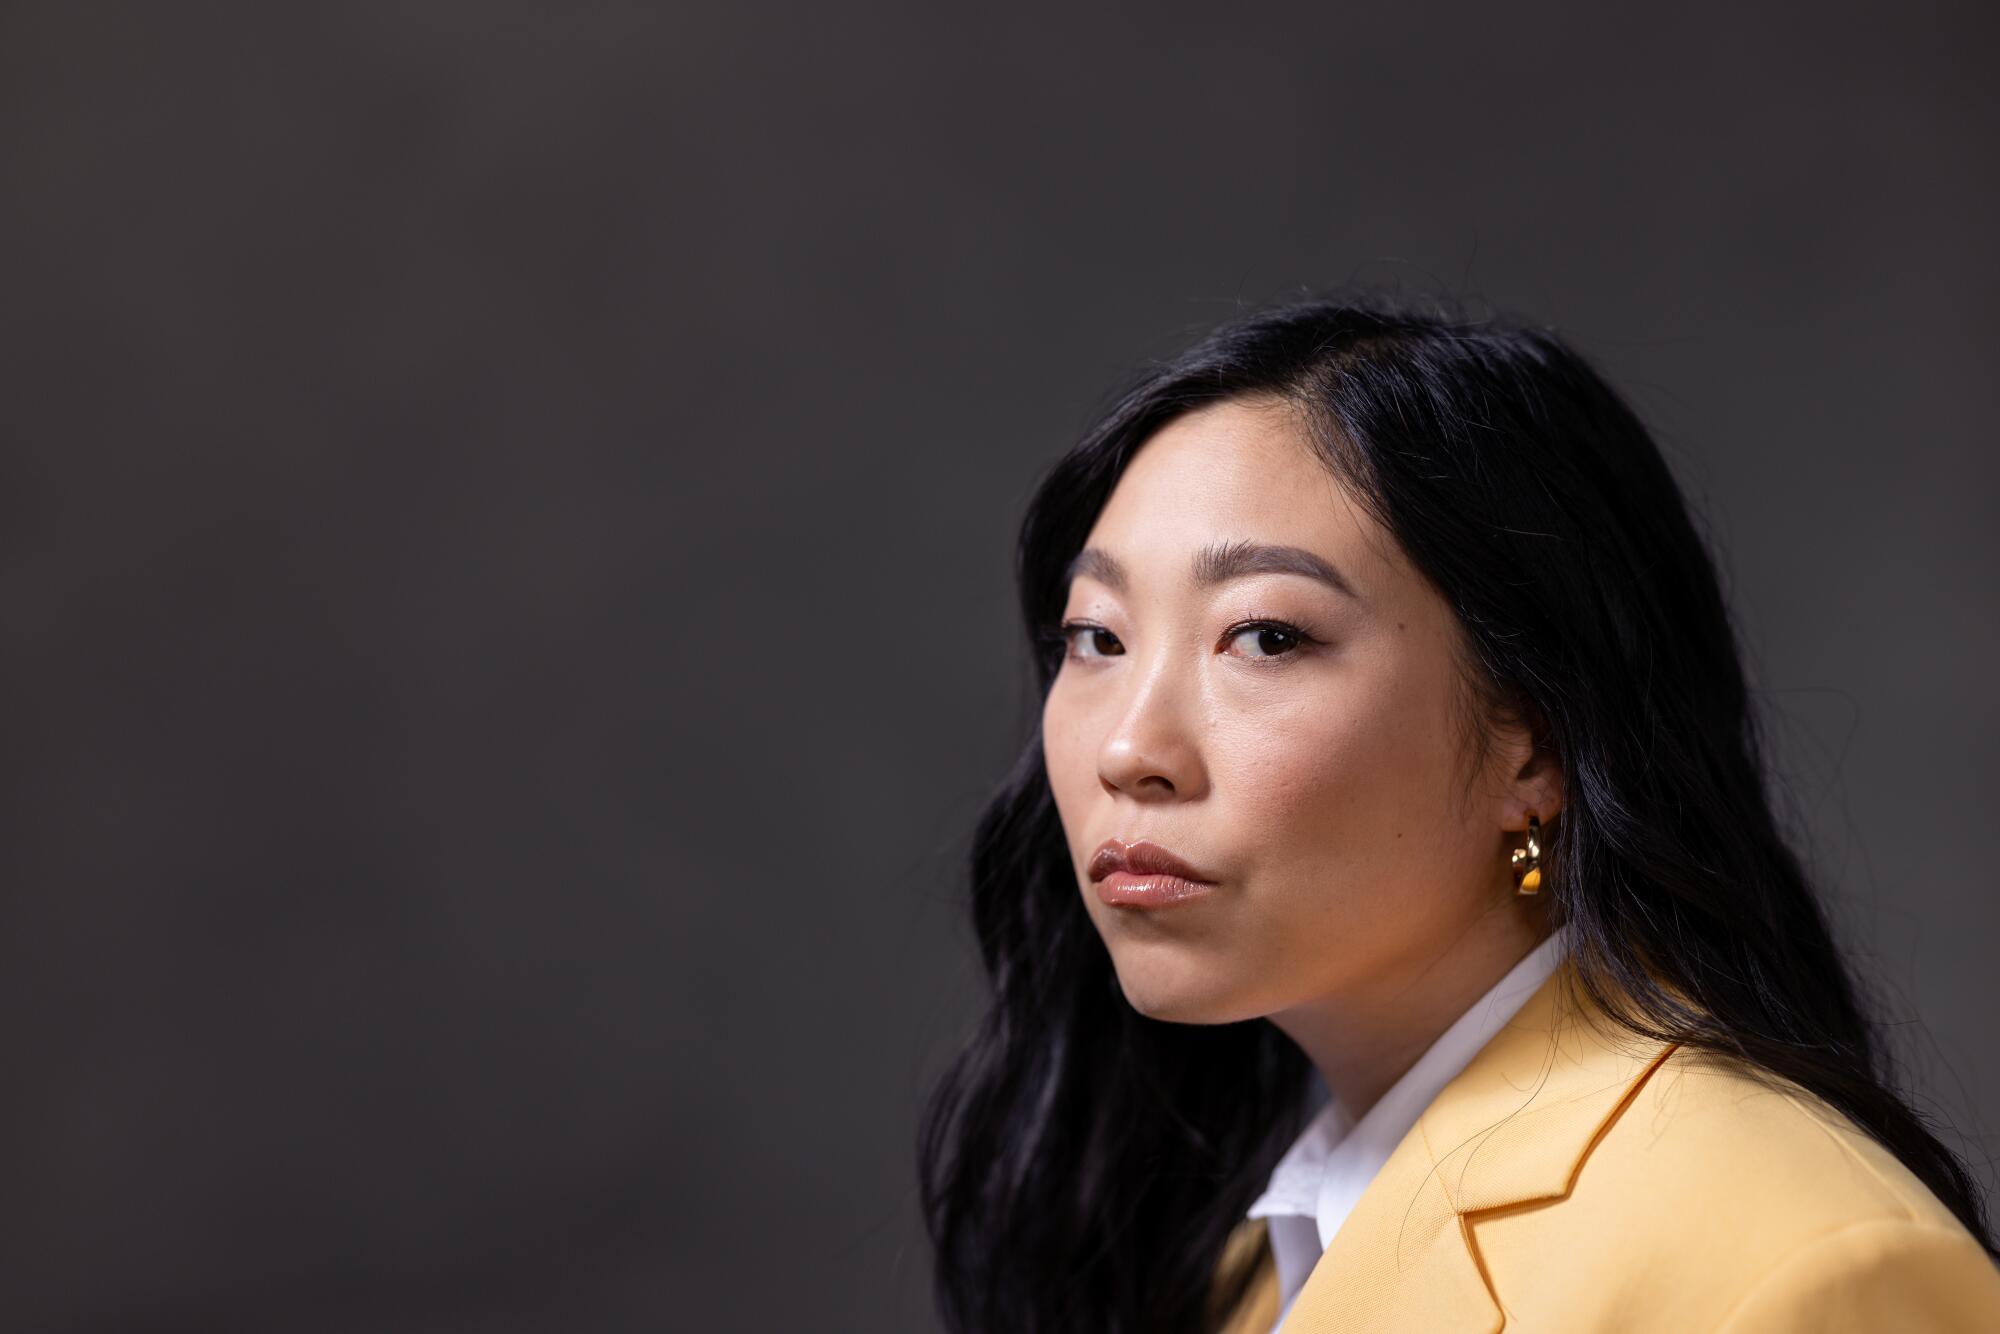 Nora Lum (Awkwafina) looks serious posing for a portrait.